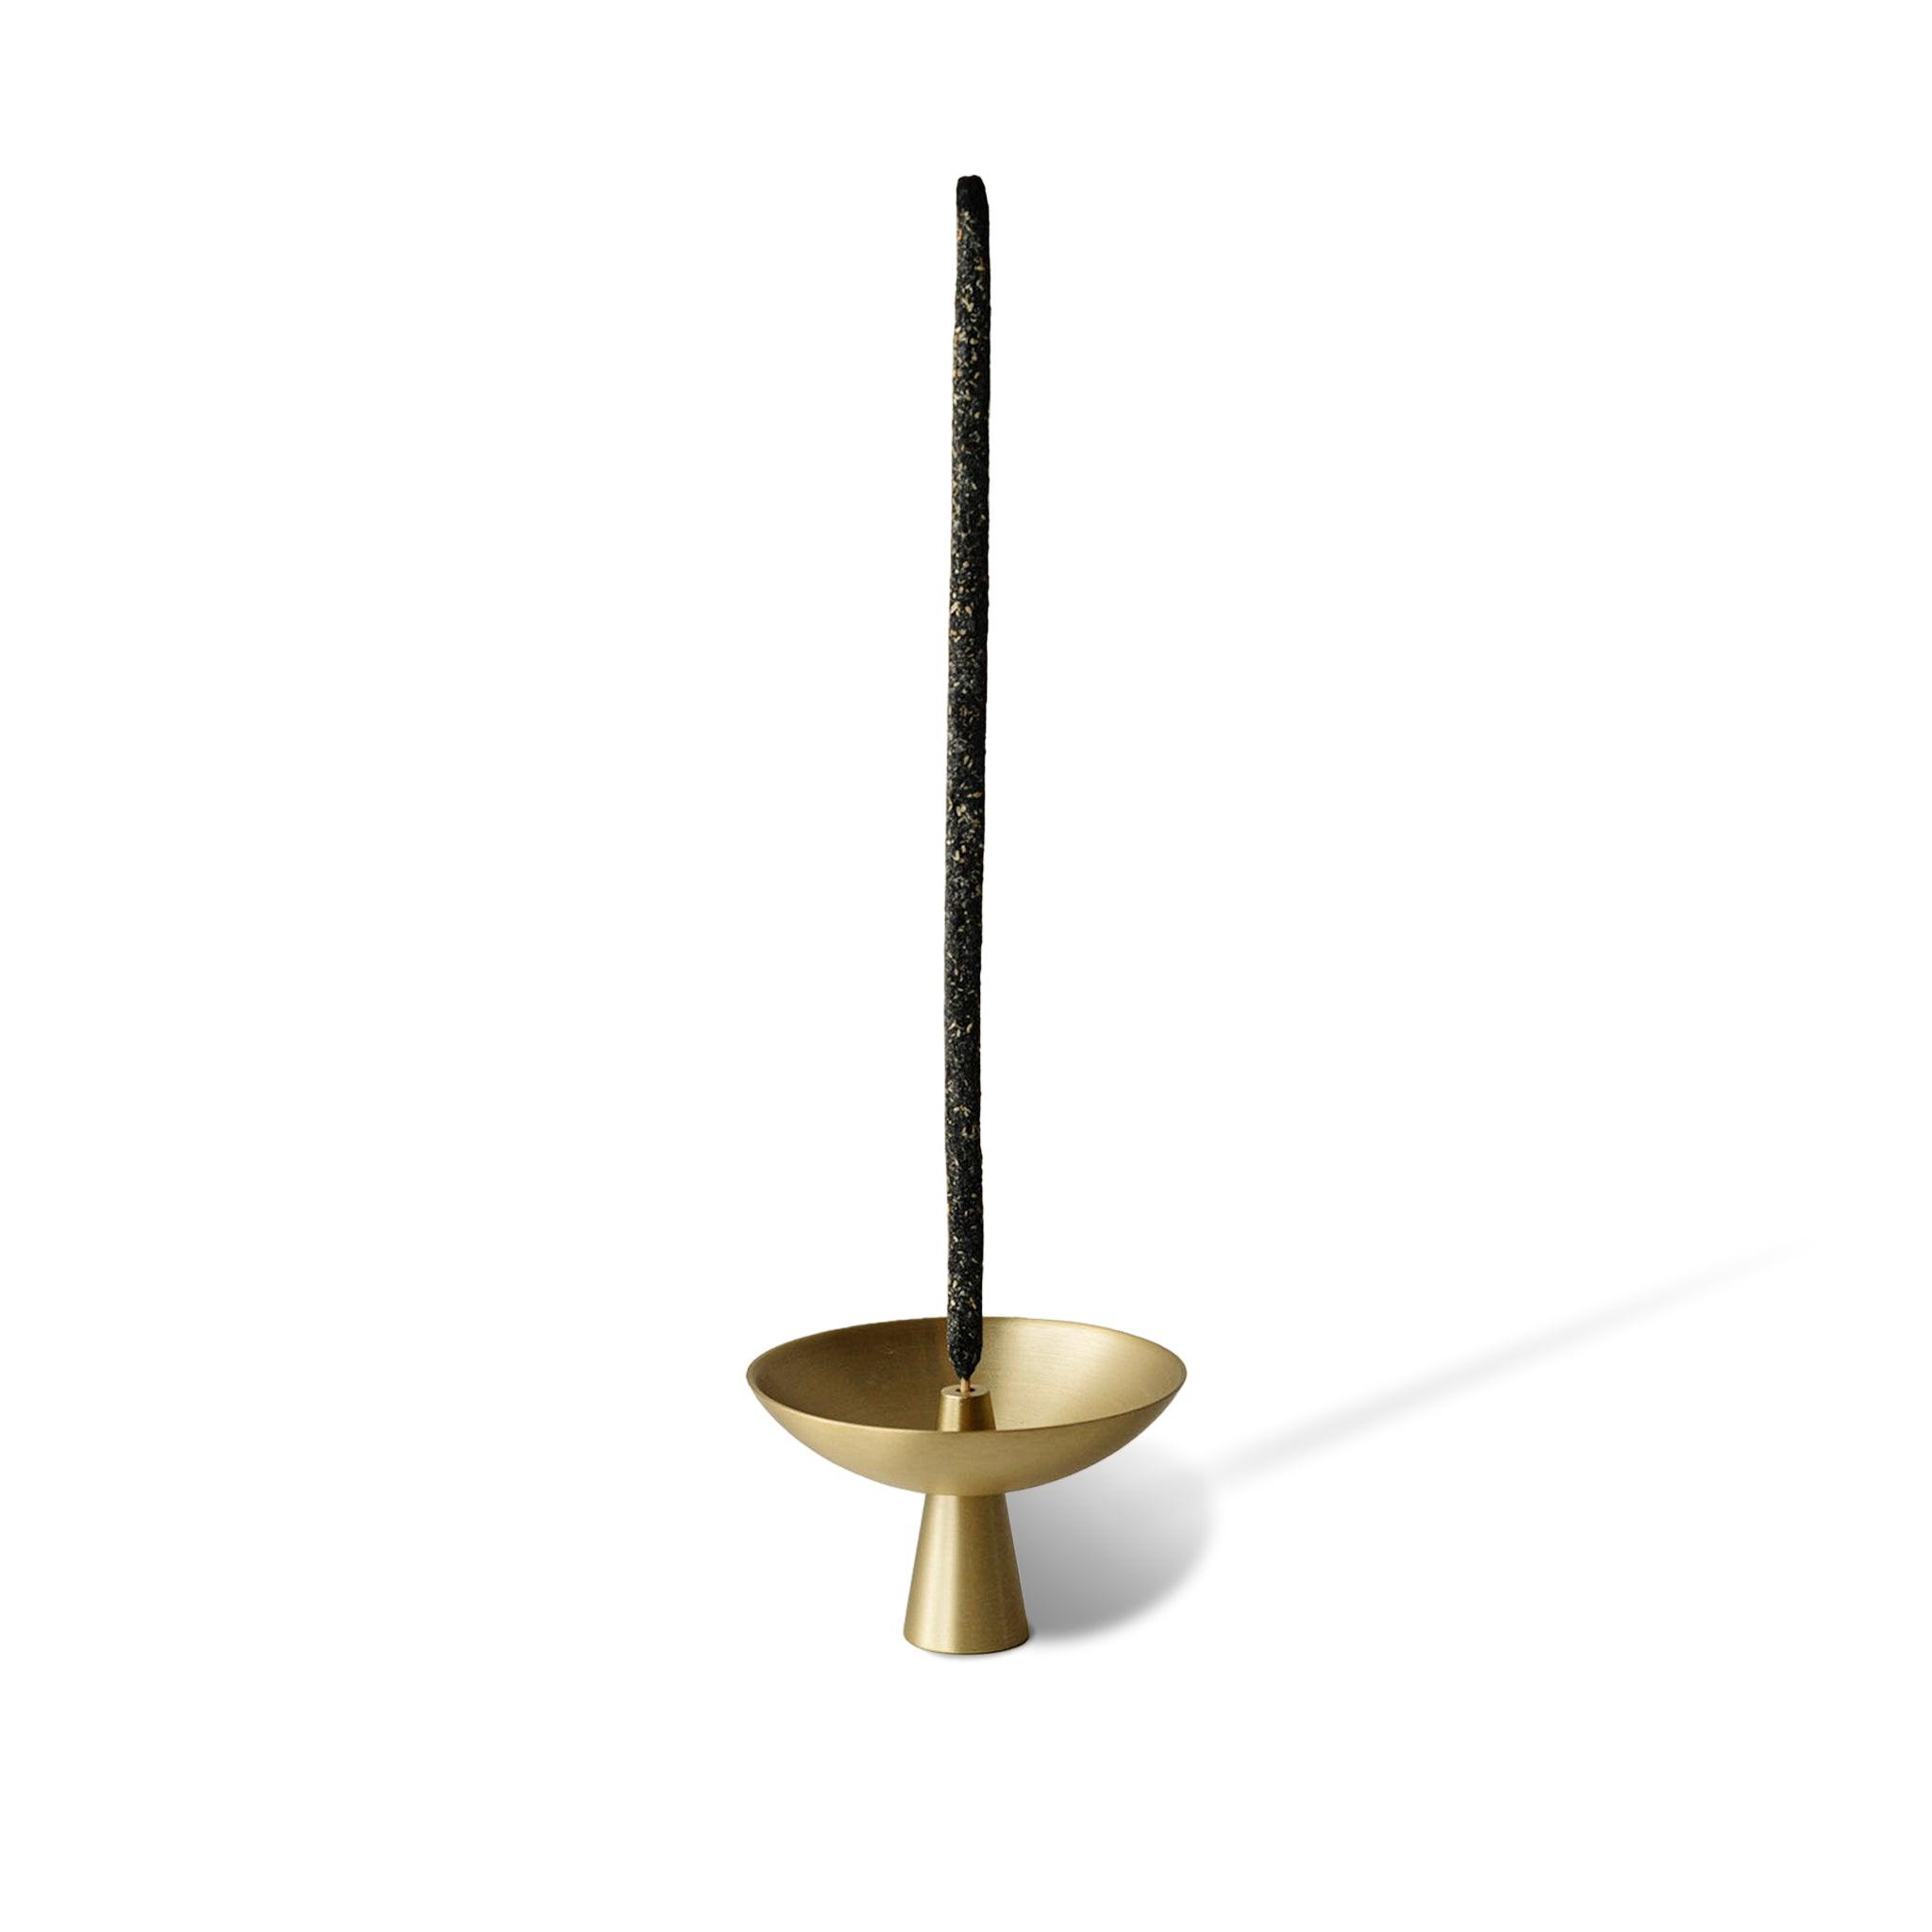 copal incense and an incense holder with ash catcher made of brass